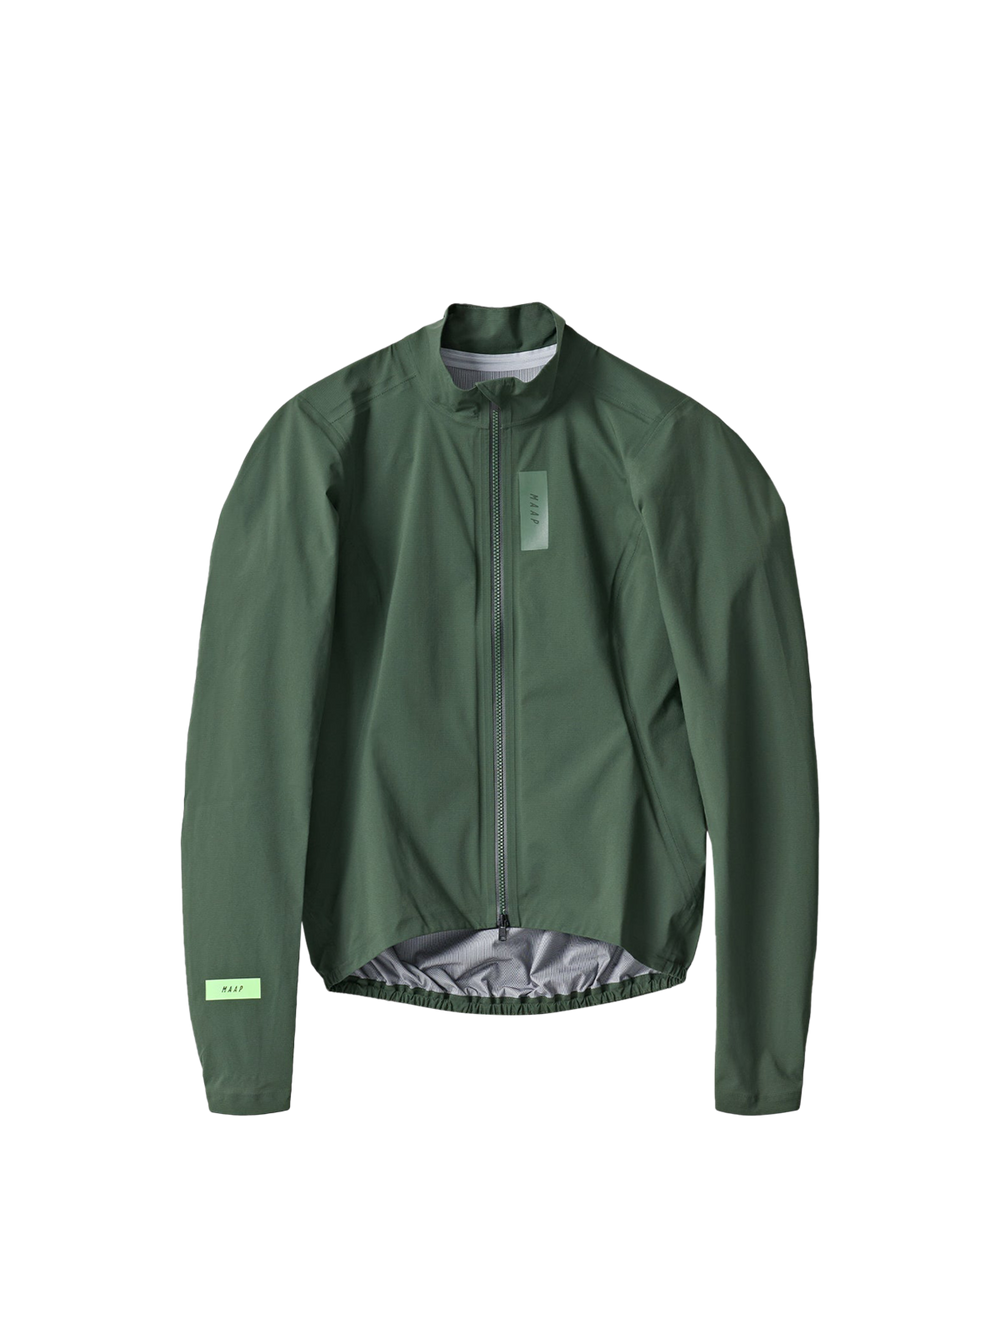 Product Image for Women's Atmos Jacket